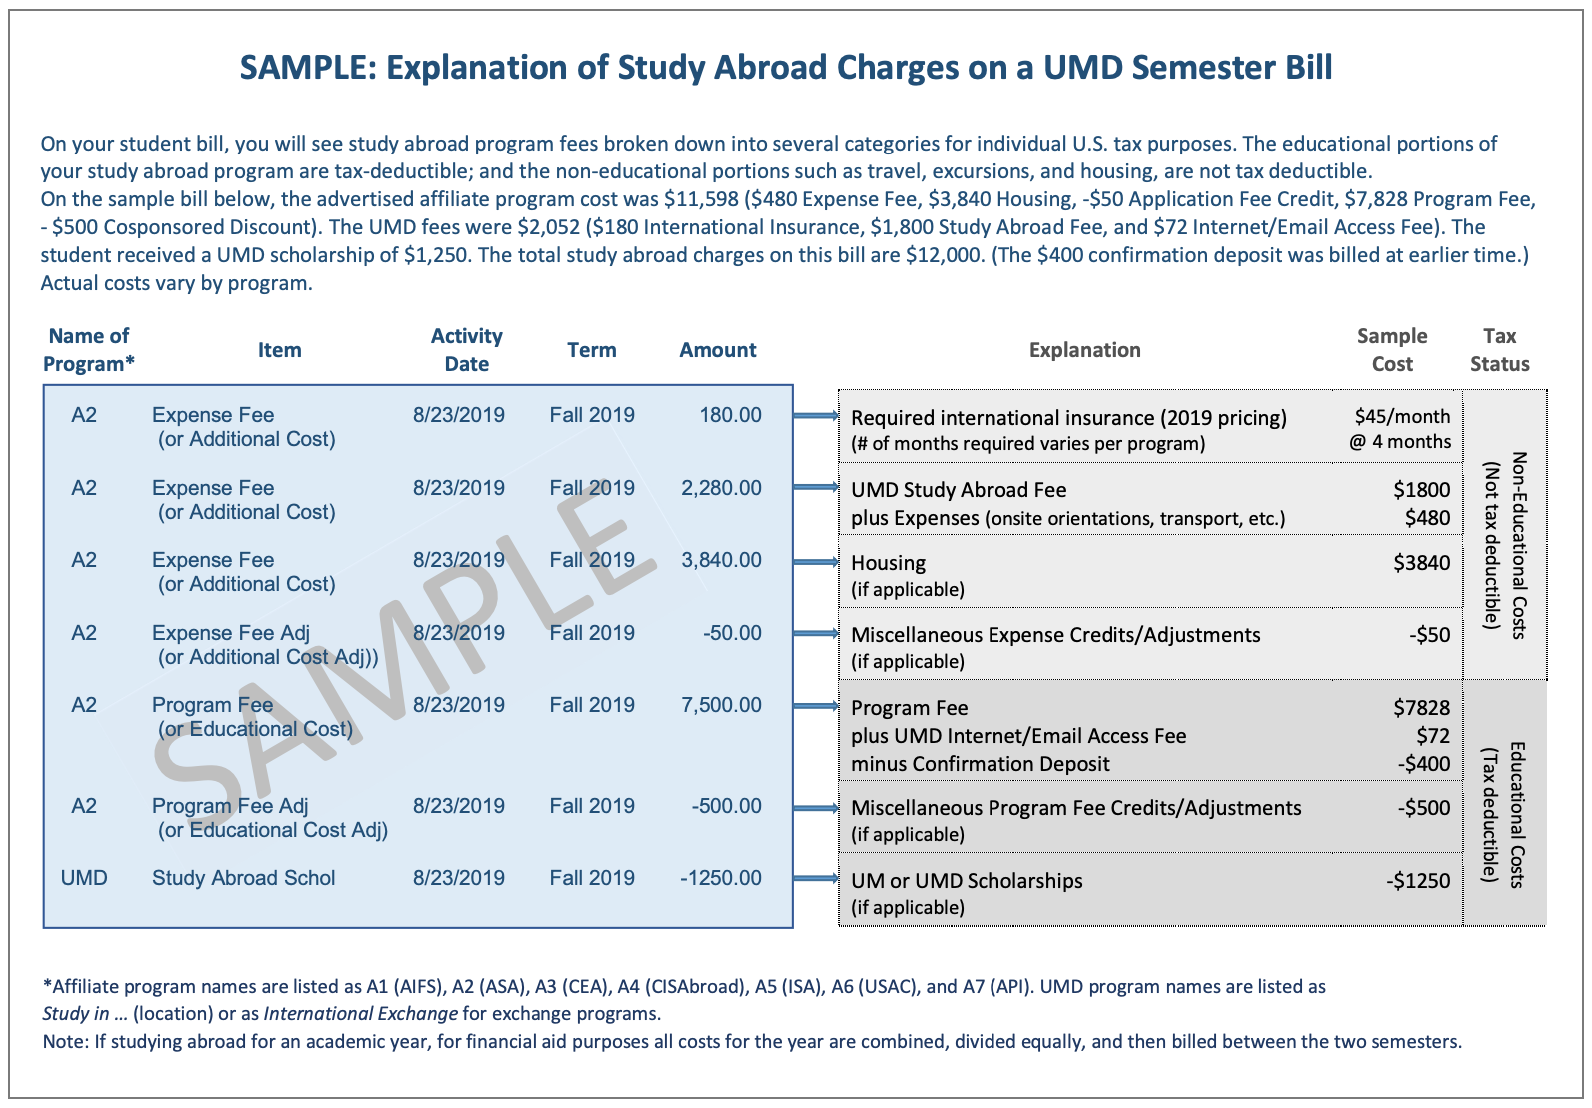 Explanation of Charges on Study Abroad Bill